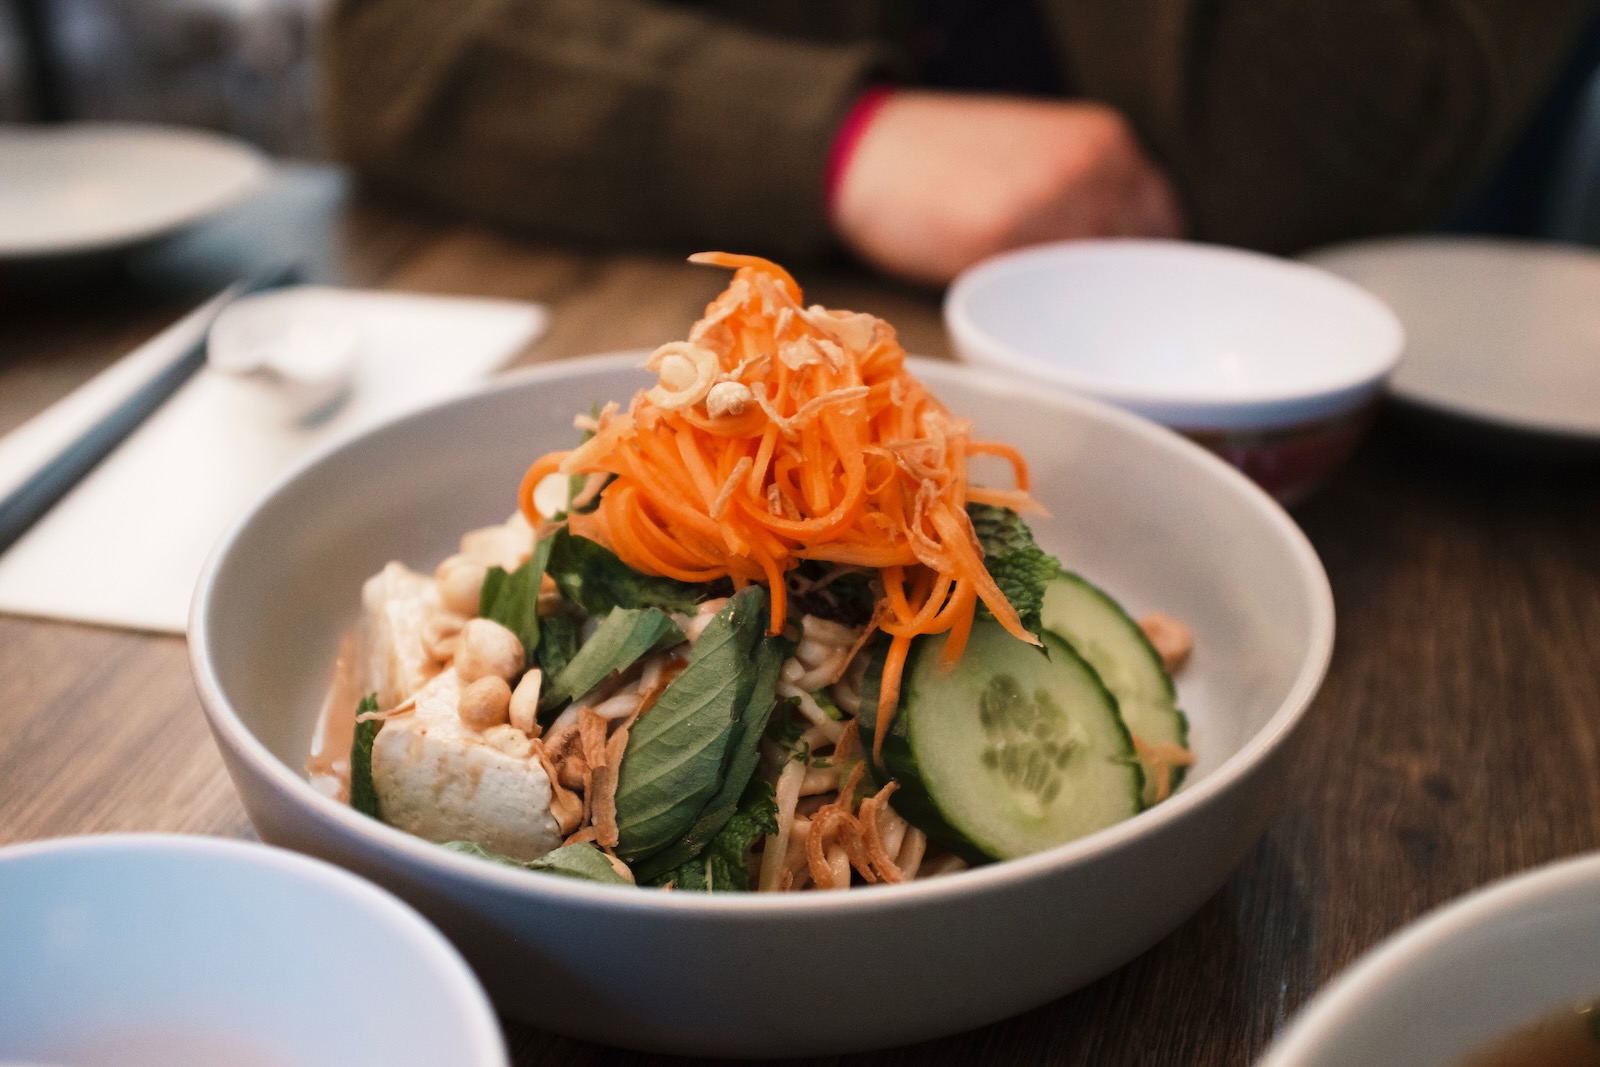 A tofu bowl topped with artfully shredded carrots and peanuts.